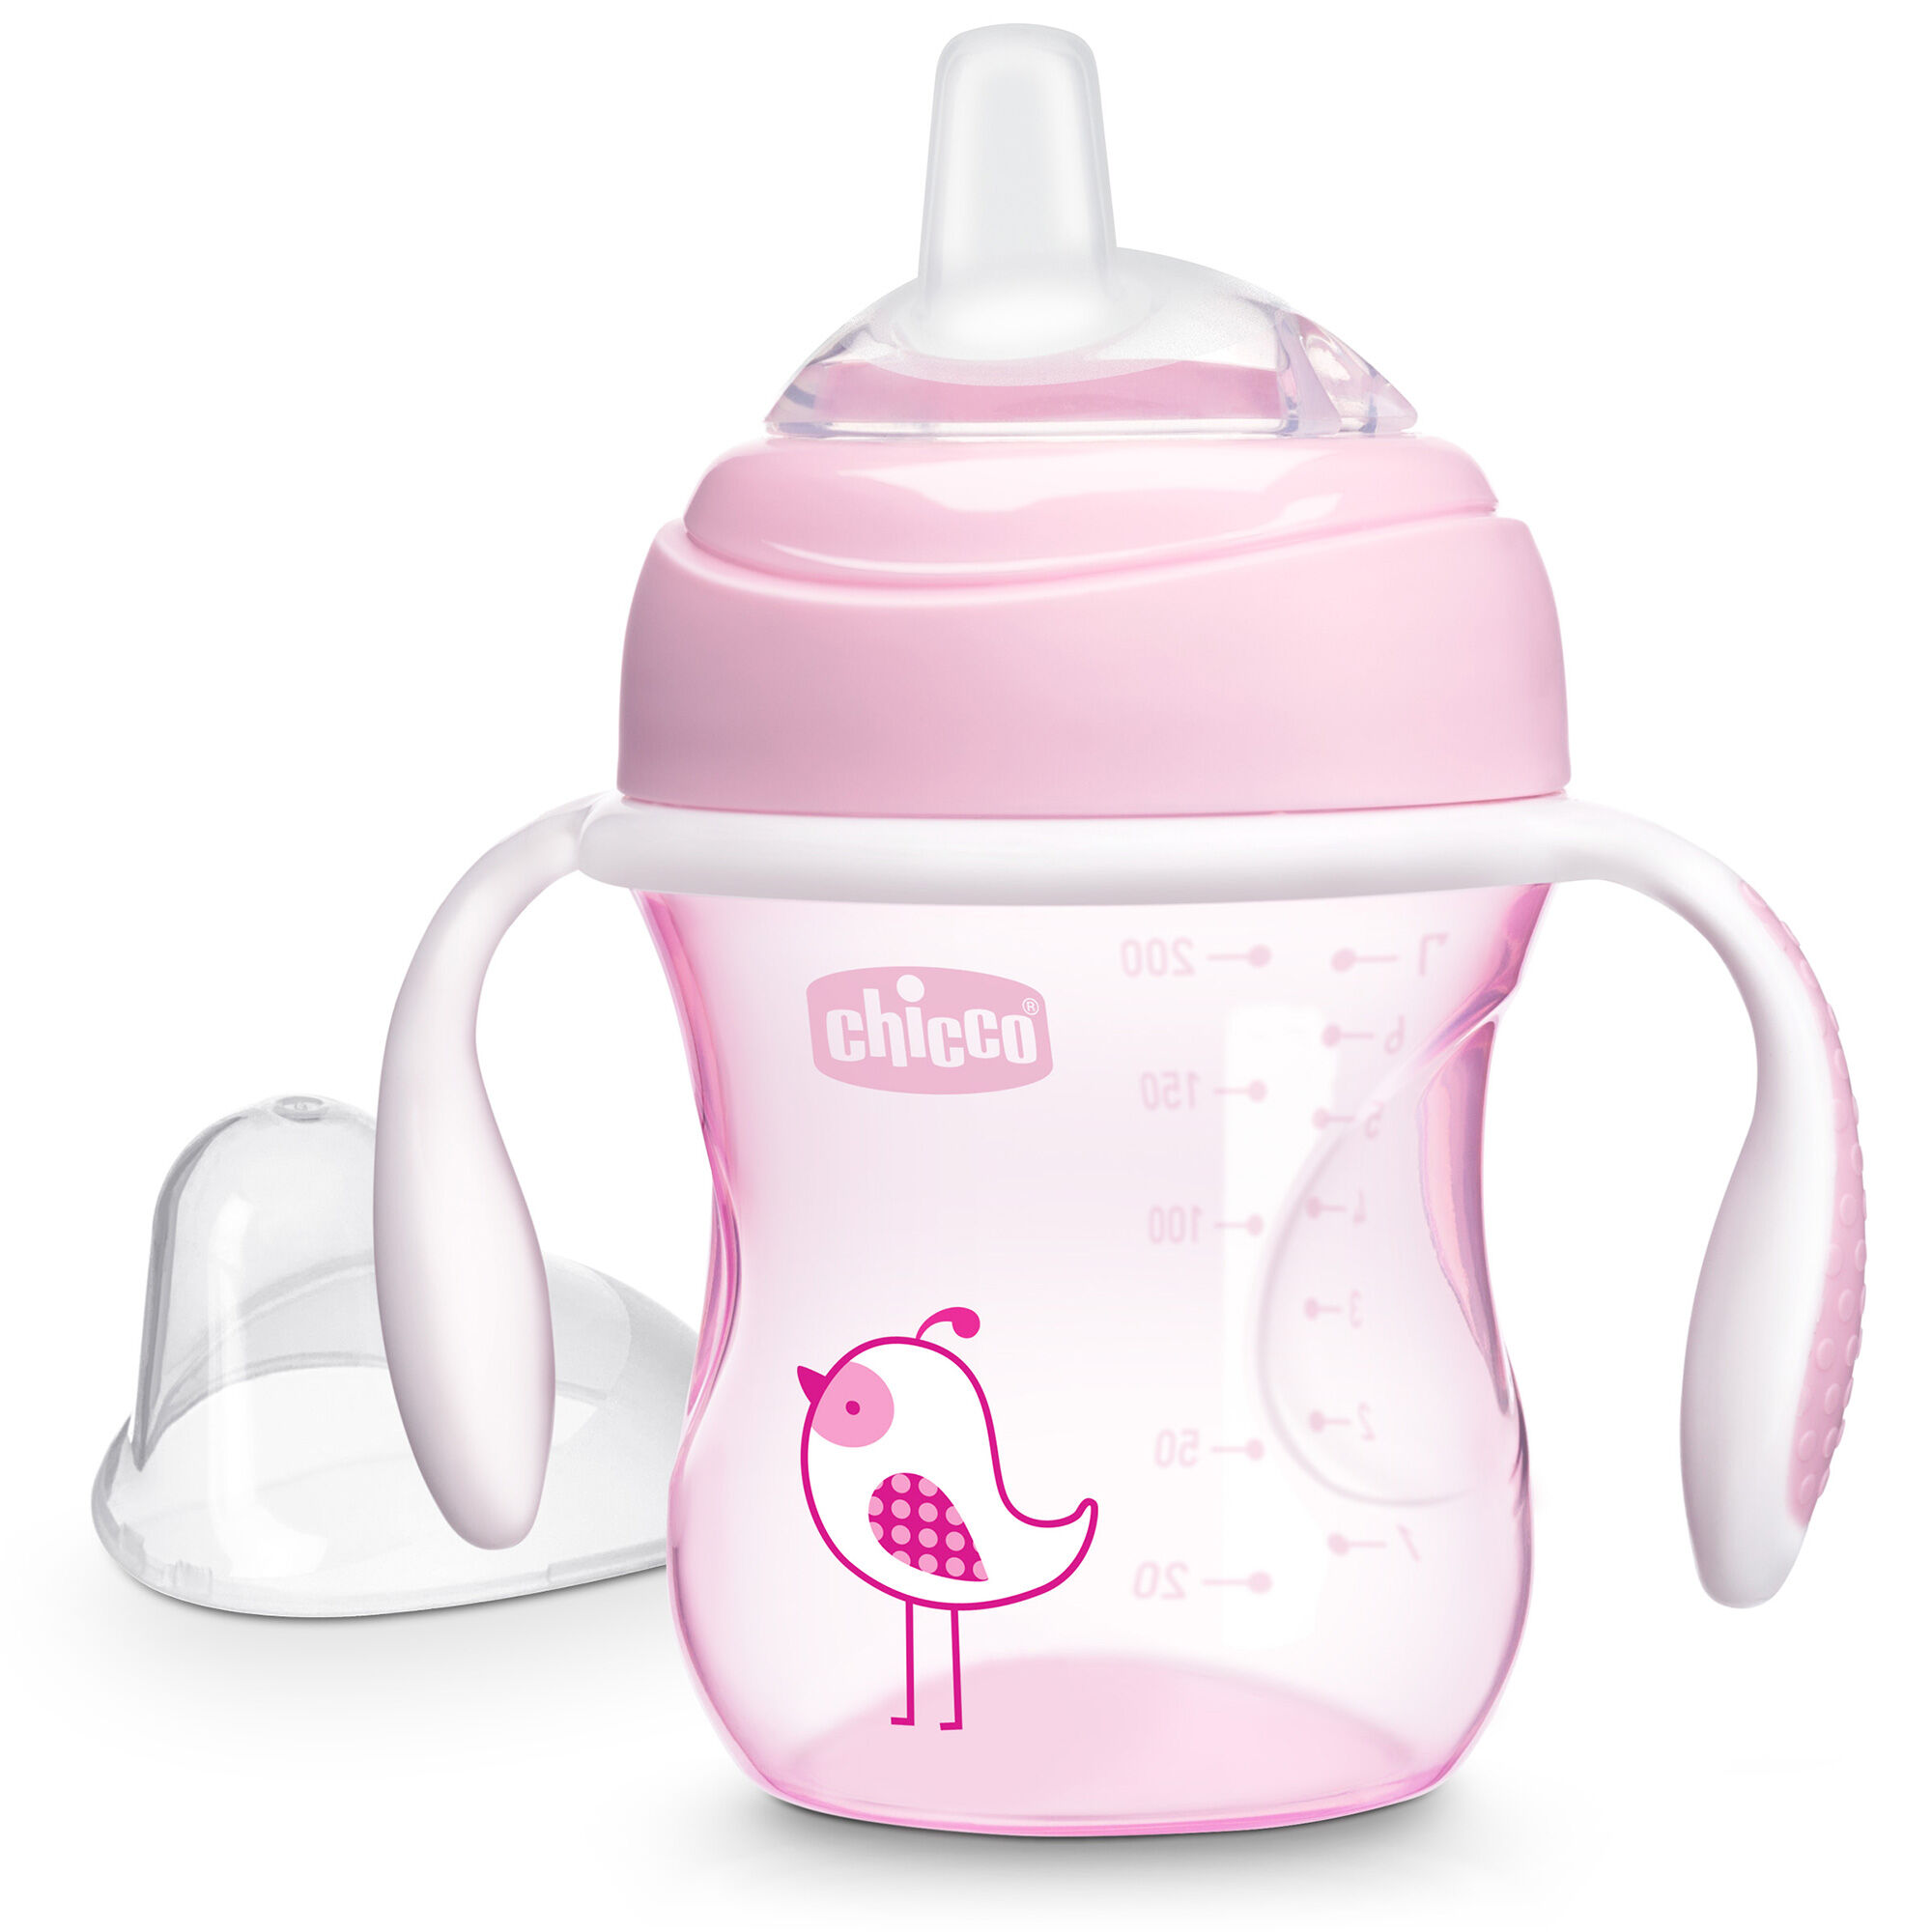 https://www.chiccousa.com/dw/image/v2/AAMT_PRD/on/demandware.static/-/Sites-chicco_catalog/default/dw292b0656/images/products/feeding/silicone-spout/Transition-Cup-Girl-Main-Image.jpg?sw=2000&sh=2000&sm=fit